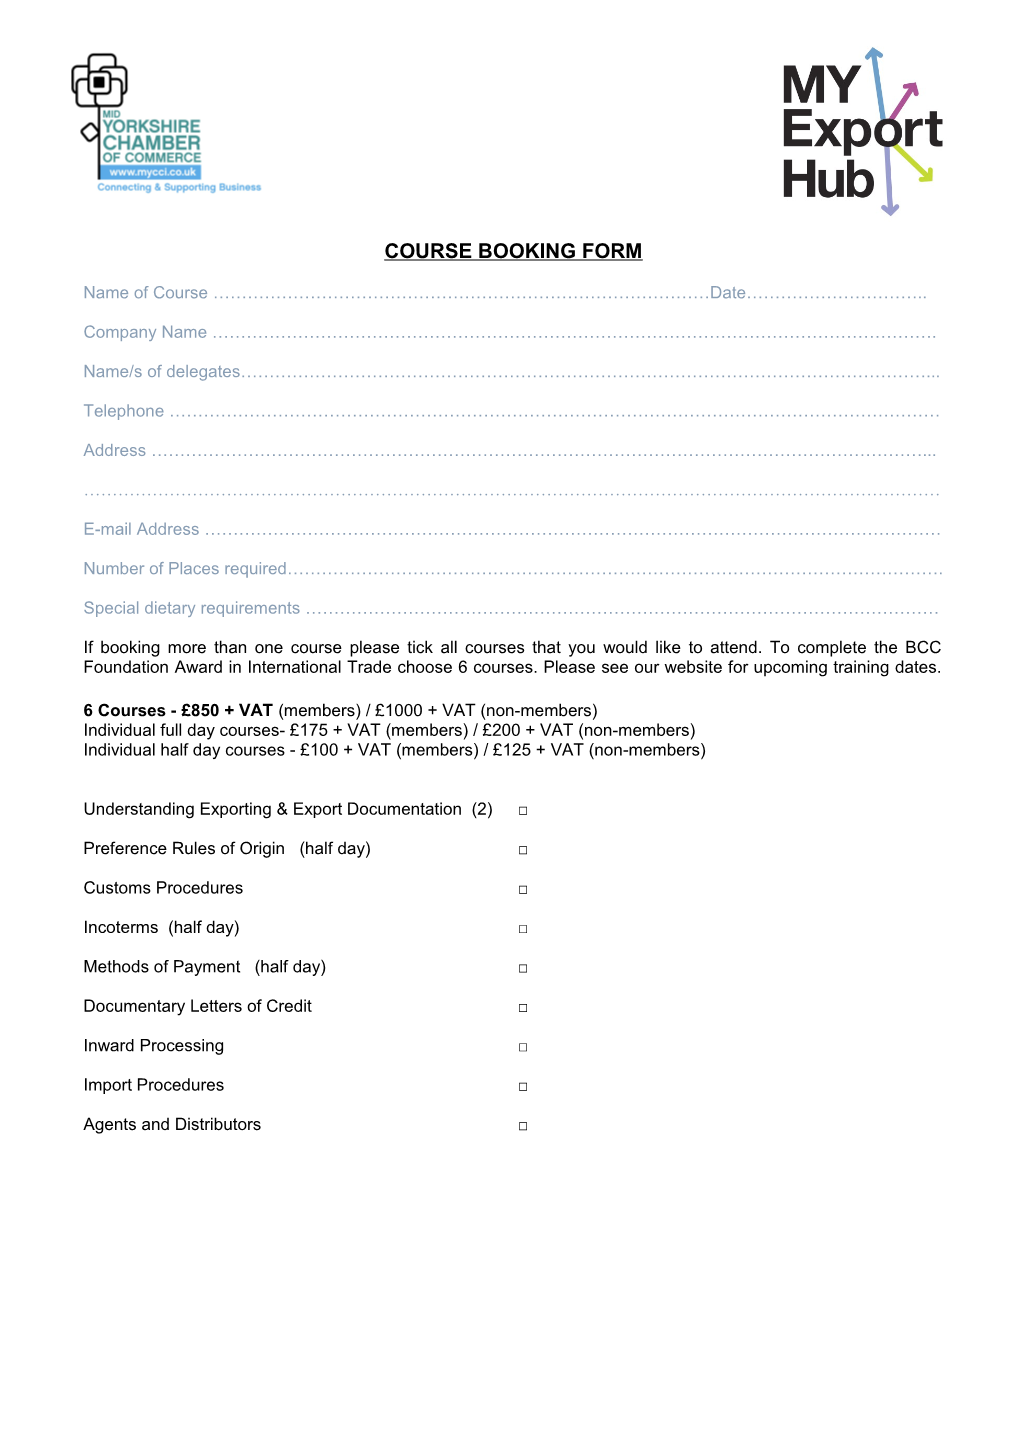 Course Booking Form s1